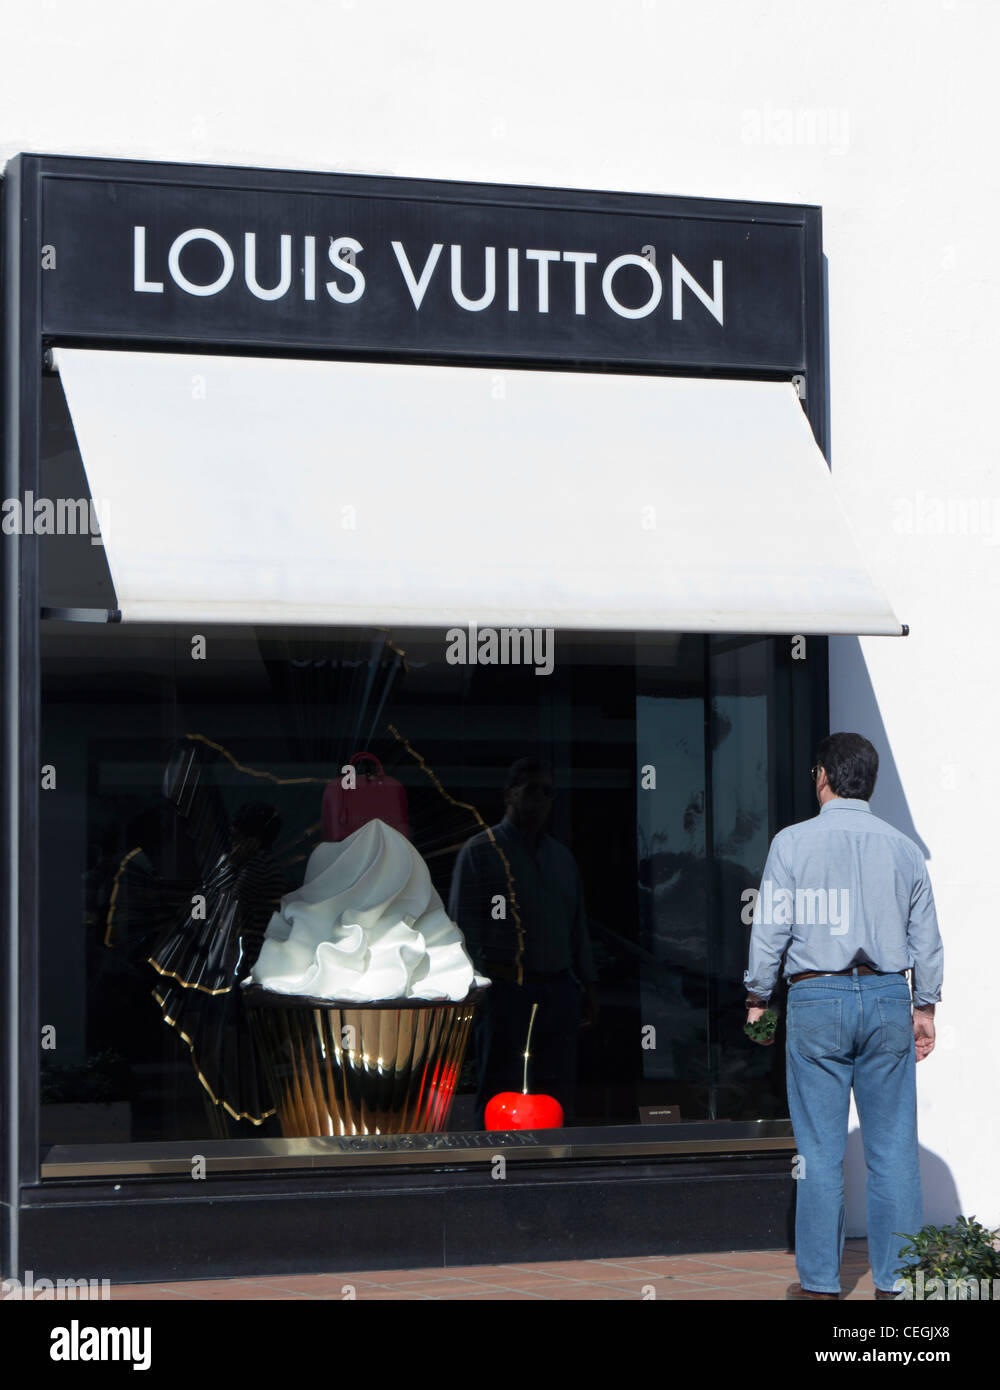 Louis vuitton spain hi-res stock photography and images - Alamy